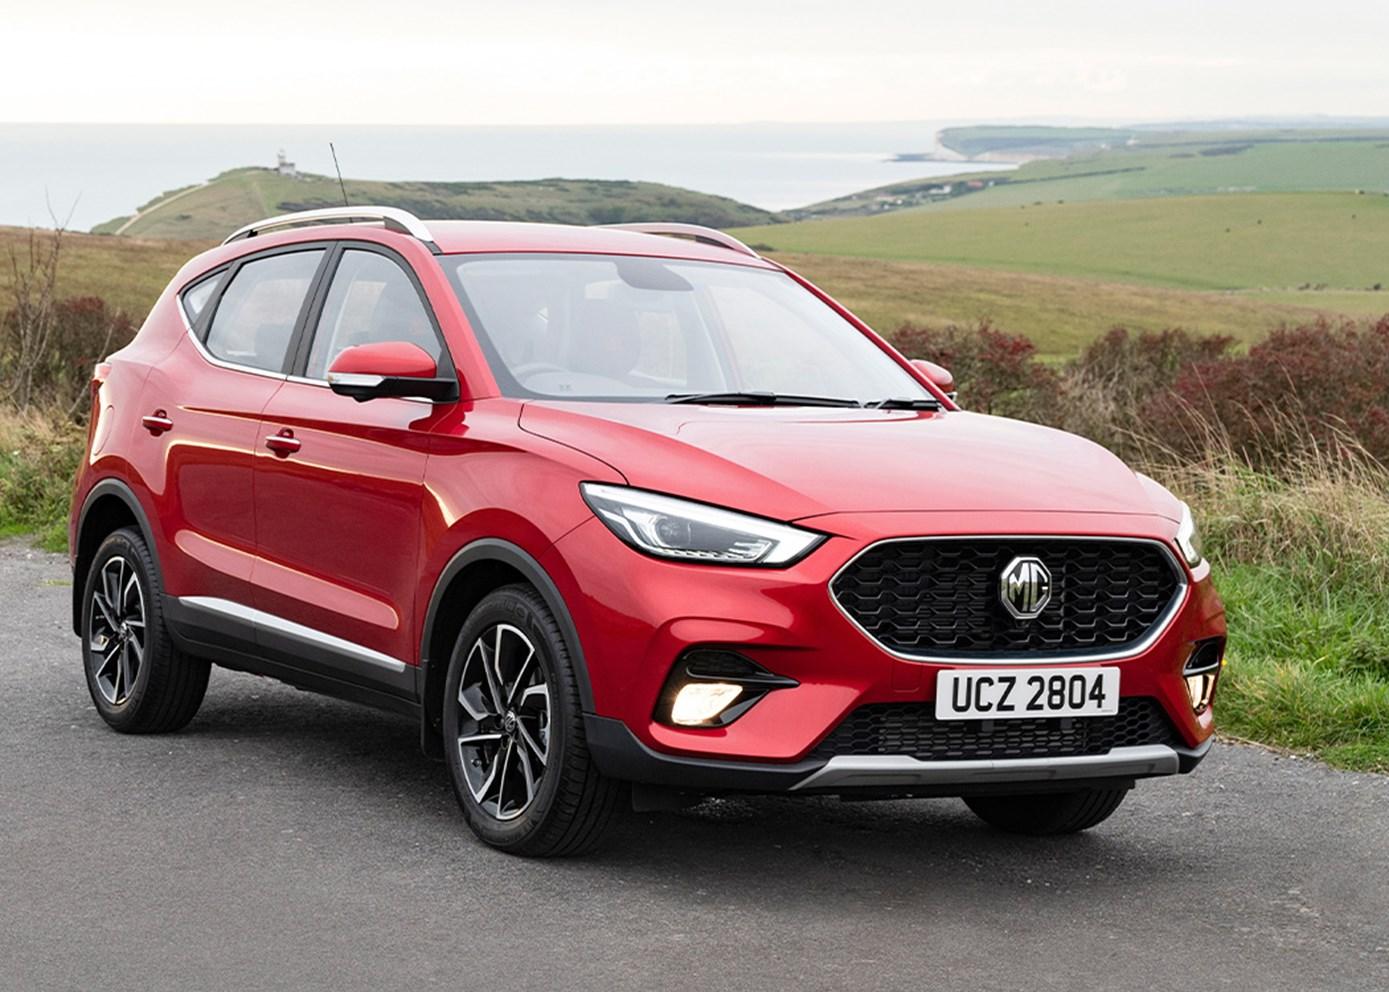 MG ZS SUV: Power, Style, and Affordability